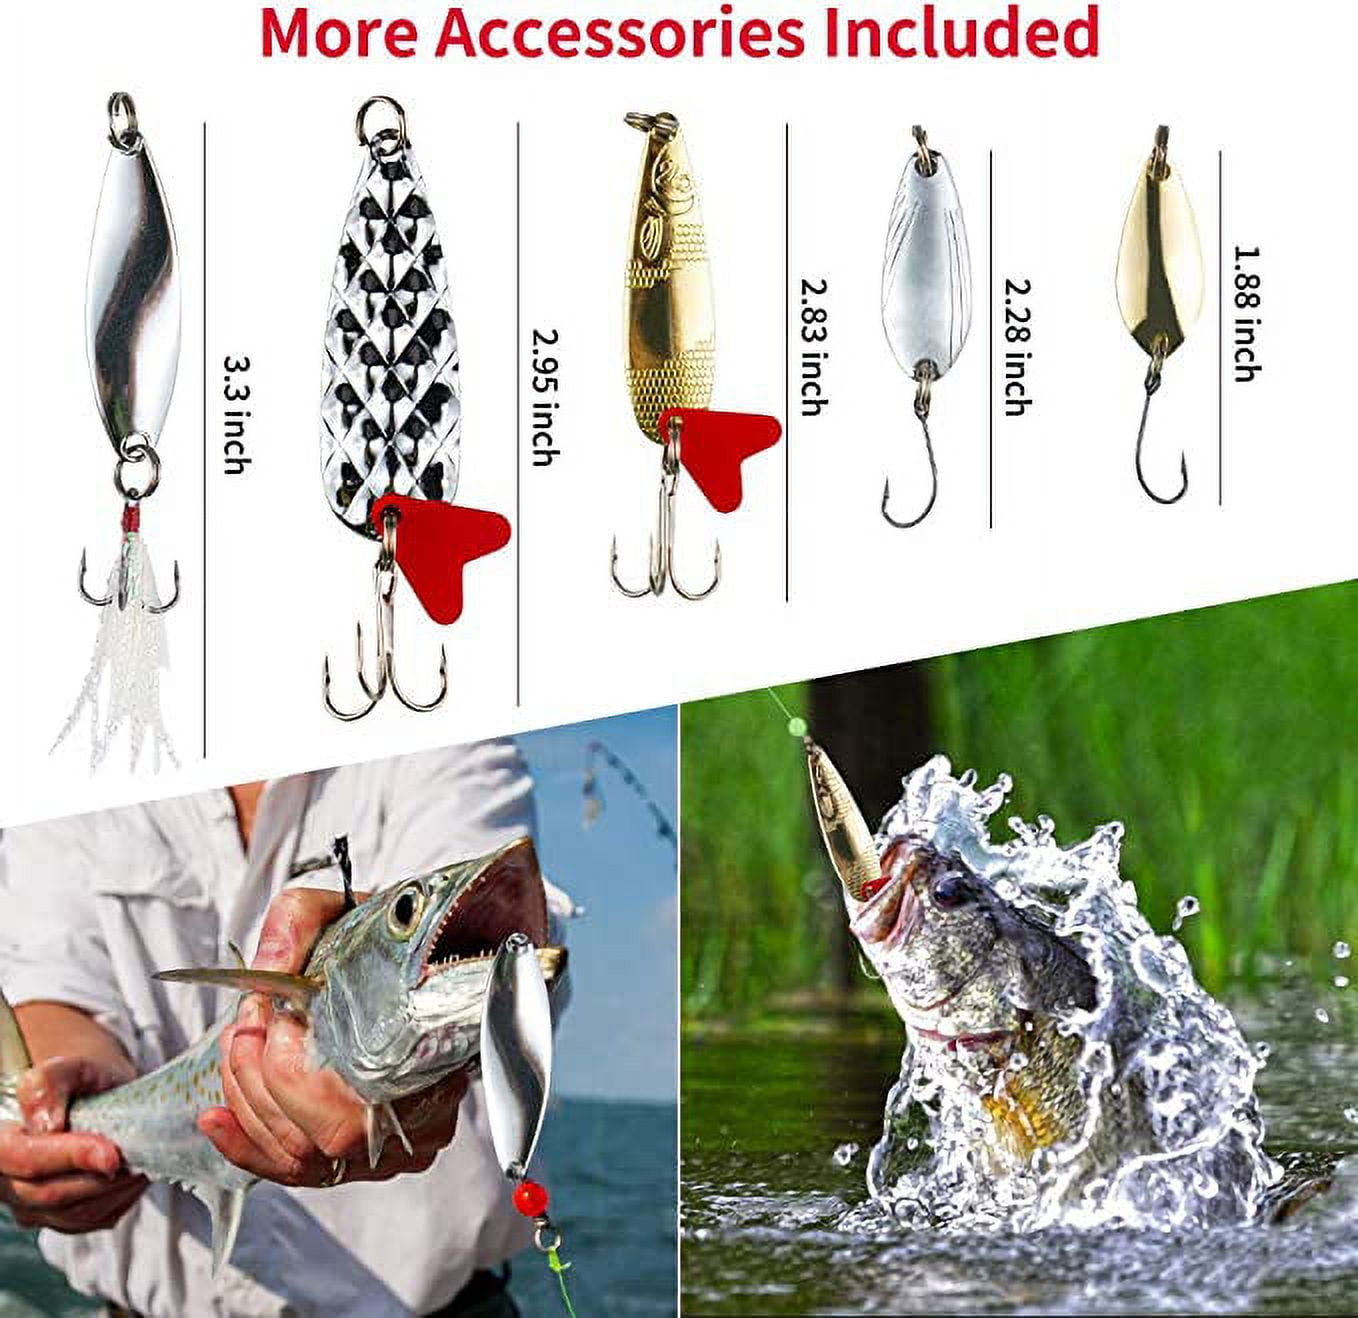 GOANDO Top Water Fishing Lures 5PCS Bass Lures with Propeller Tail Fishing  Gear and Equipment for Bass Trout Catfish Pike Perch Bass Fishing Lure Kit